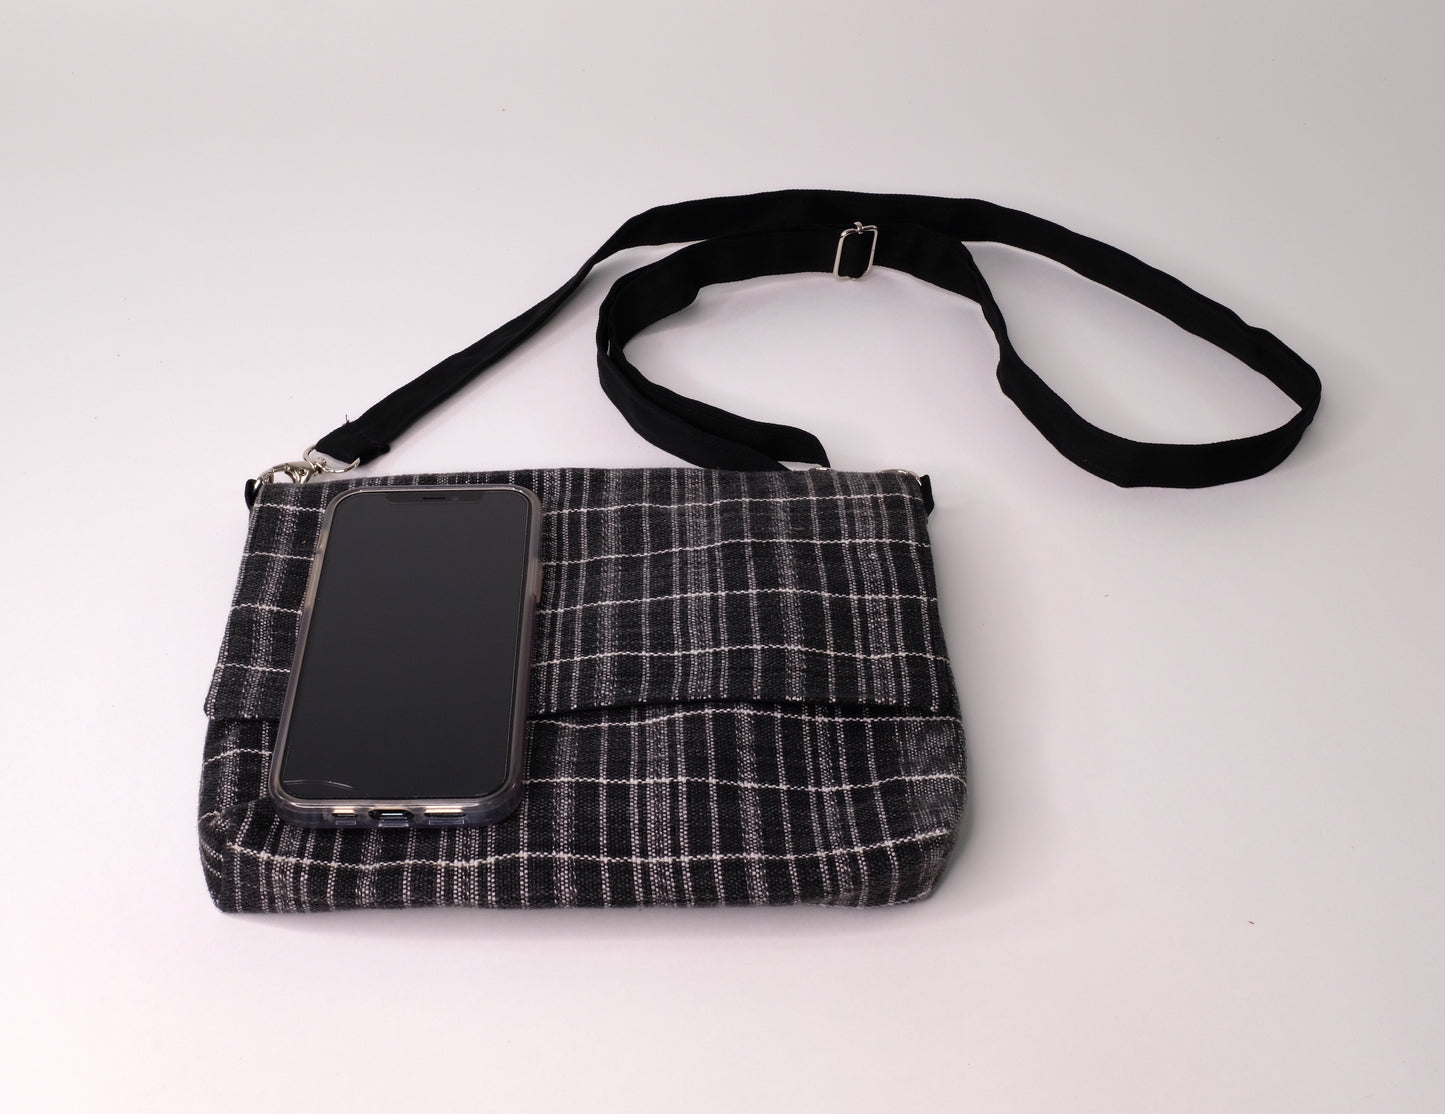 Crossbody bag constructed with carefully handwoven black ikat cotton textiles. With a phone for size comparison.